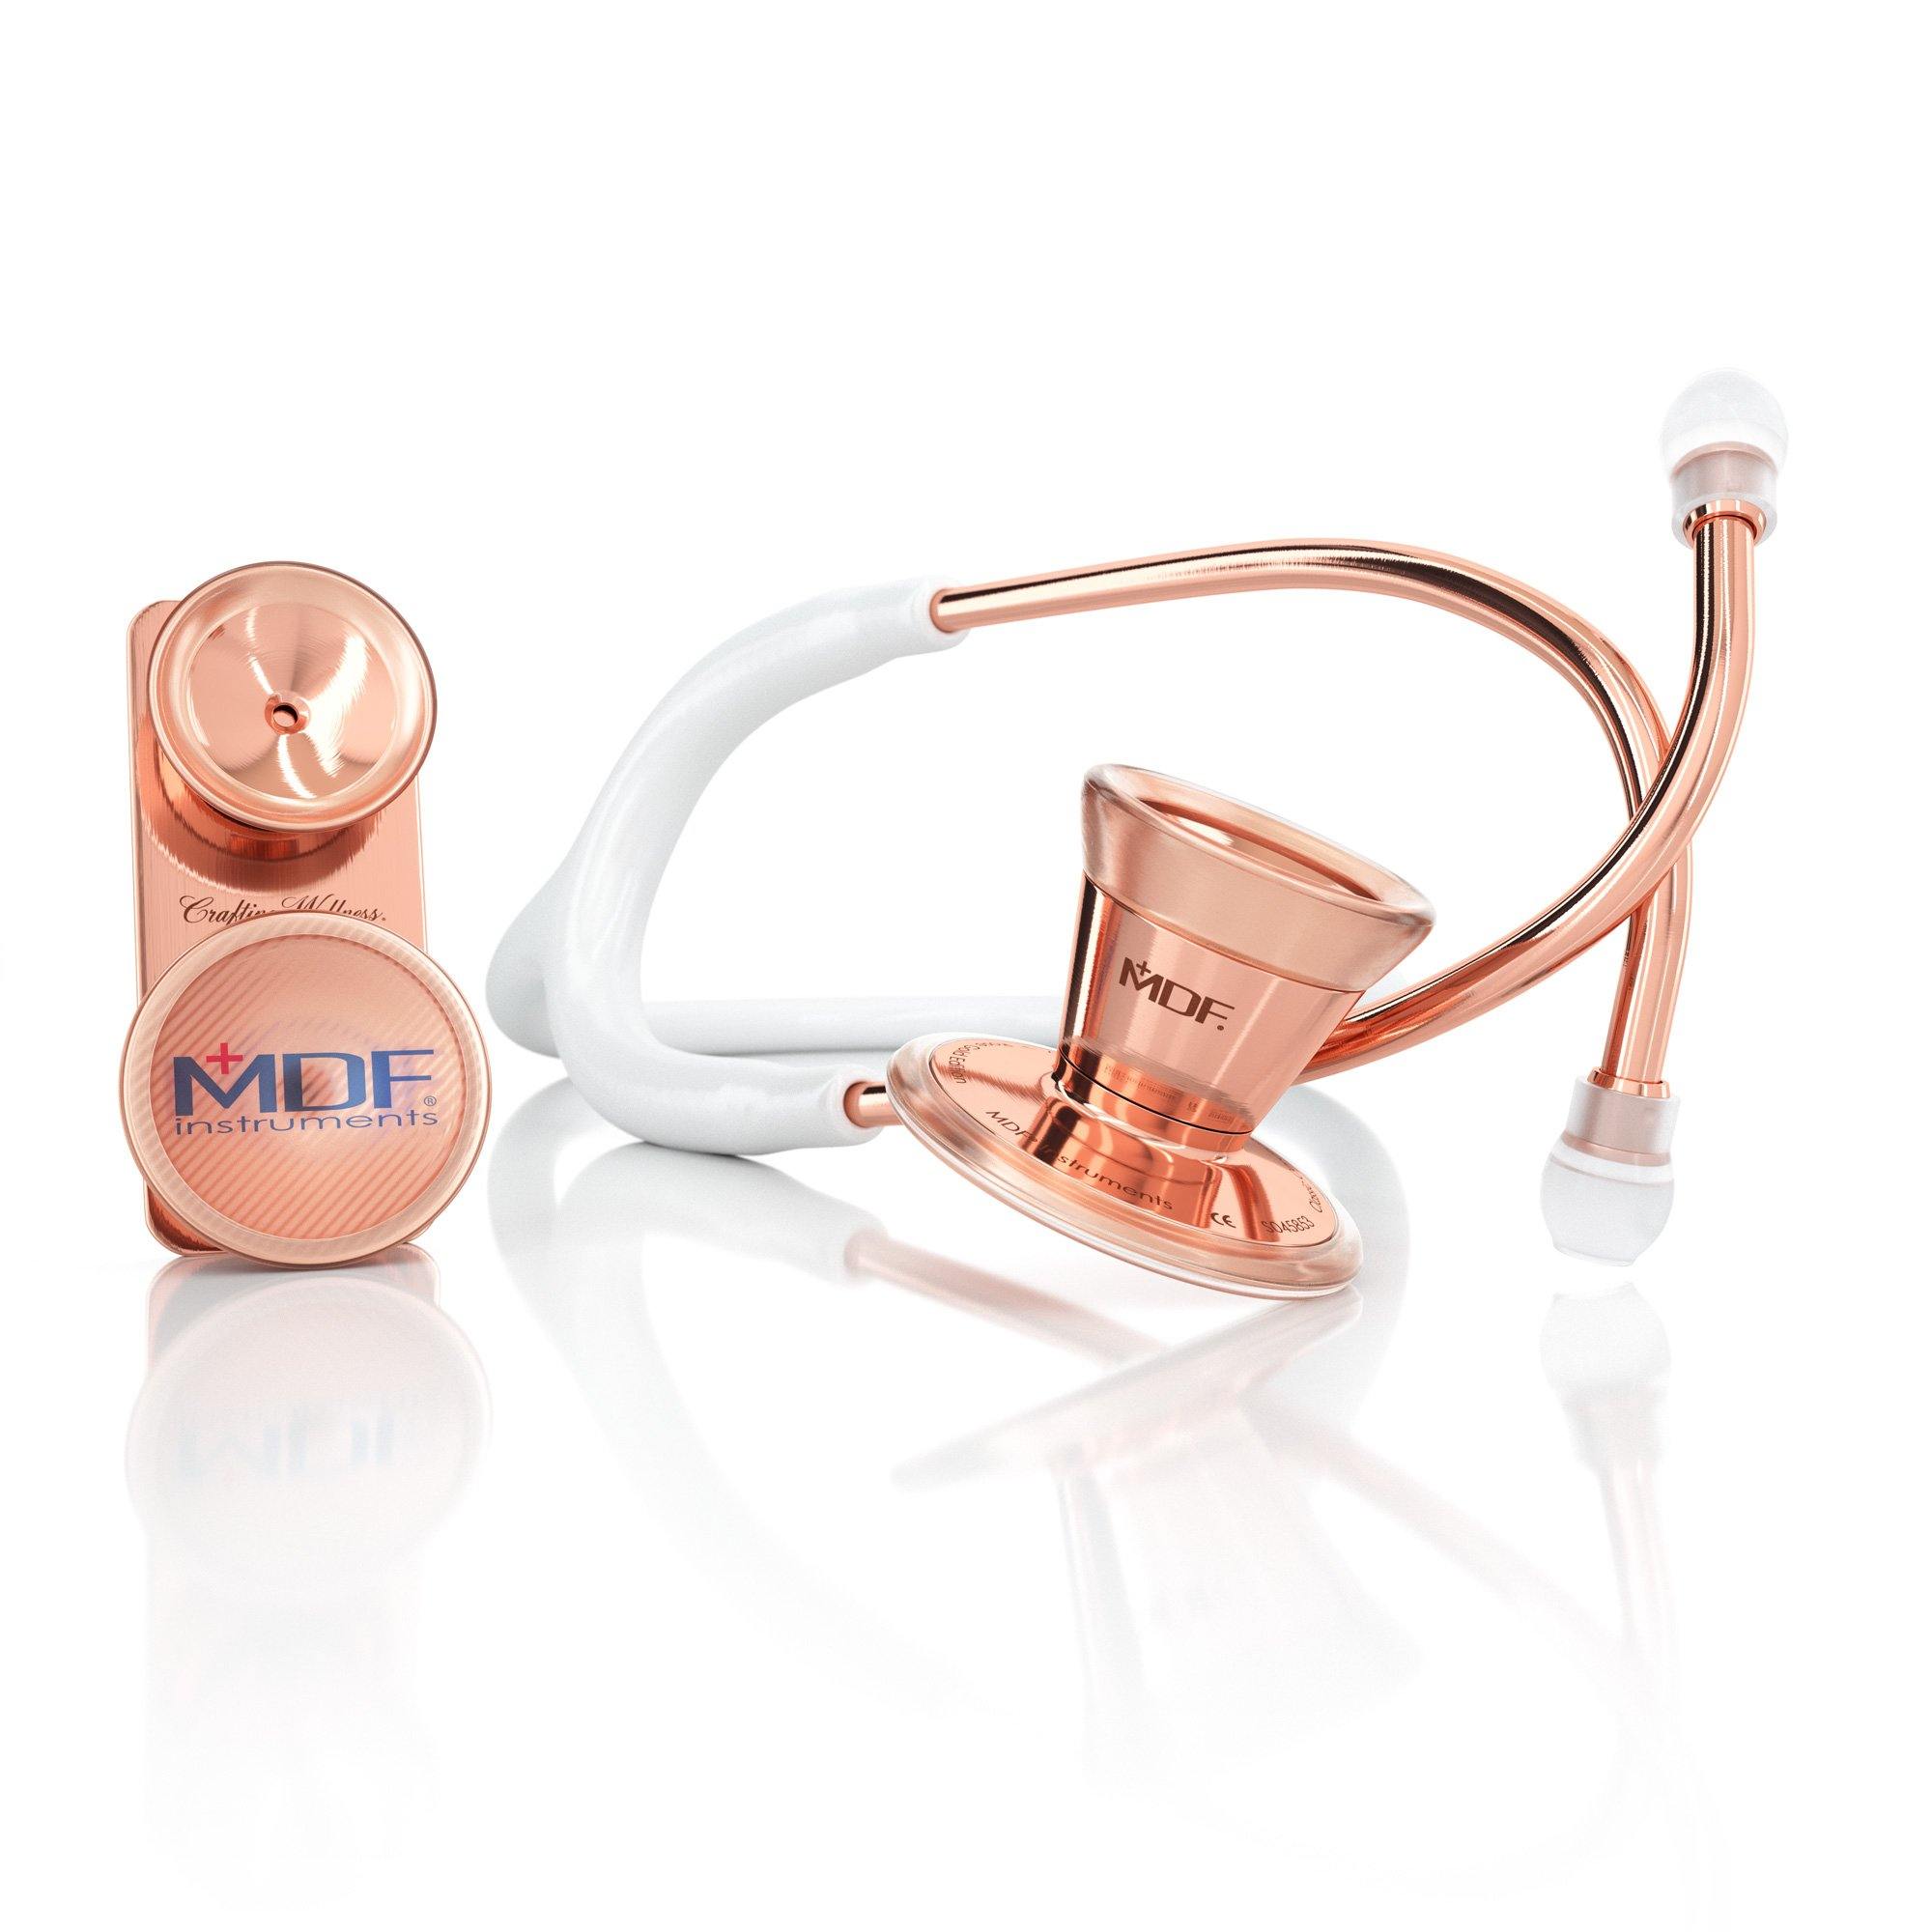  MDF Snow Leopard Rose Gold ProCardial Cardiology Stethoscope,  Limited Edition Mprints, Lightweight Titanium, Adult, Dual Head, Snow  Leopard Tube, Rose Gold Chestpiece-Headset, MDF797TSLRG : Industrial &  Scientific